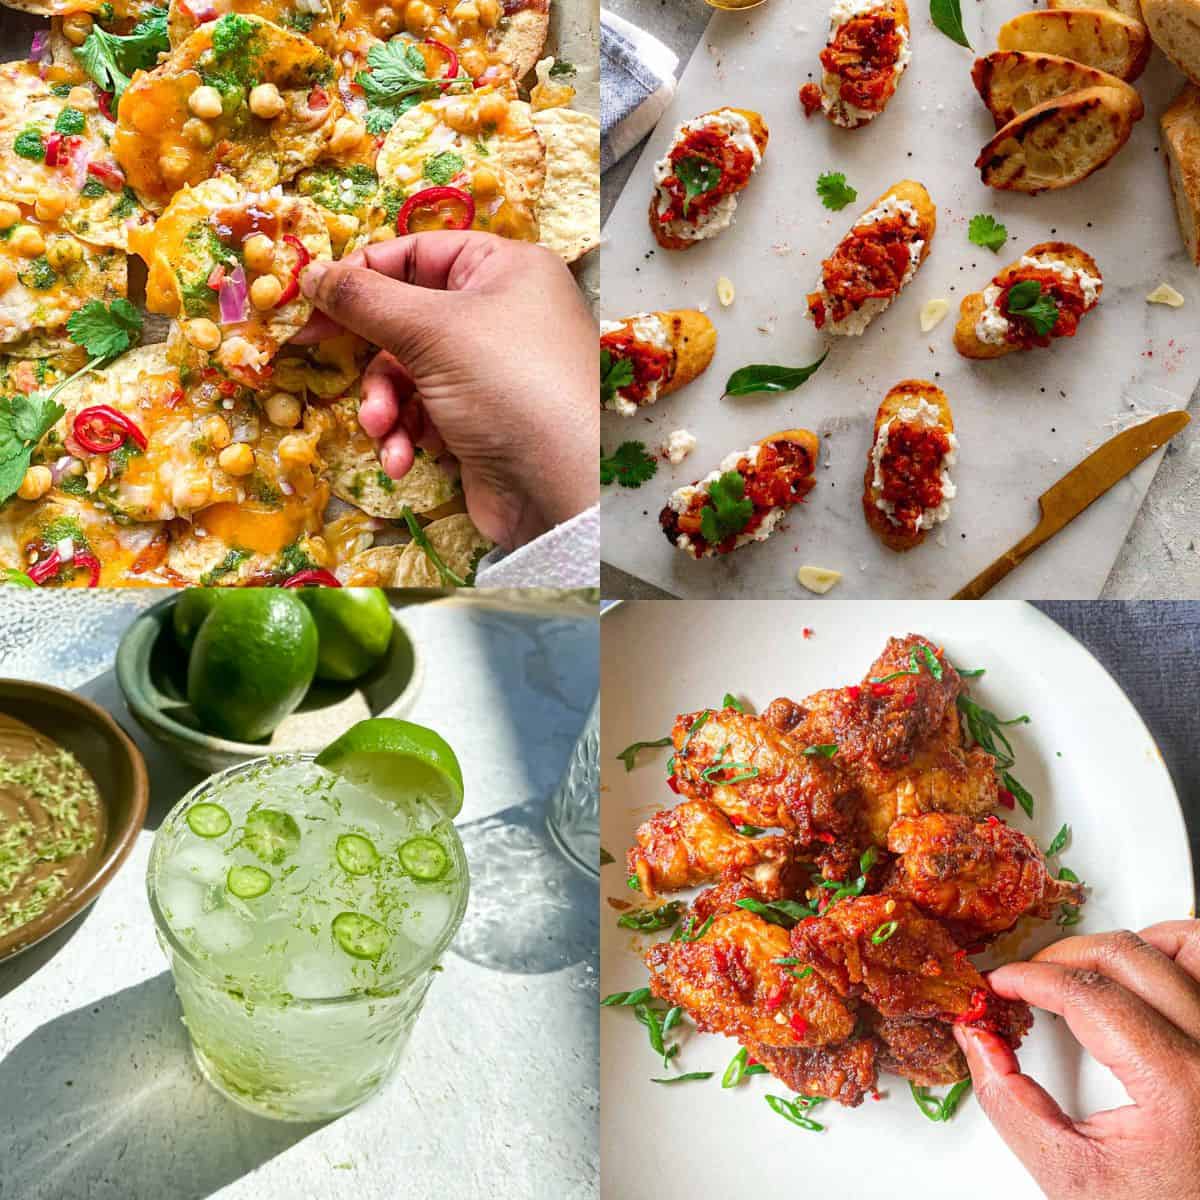 Indian superbowl appetizer ideas represented as four photos . Top left is chaat nachos, top right is tomato chutney bruschetta, bottom left is spicy nimbu pani, and bottom right is oven baked manchurian wings